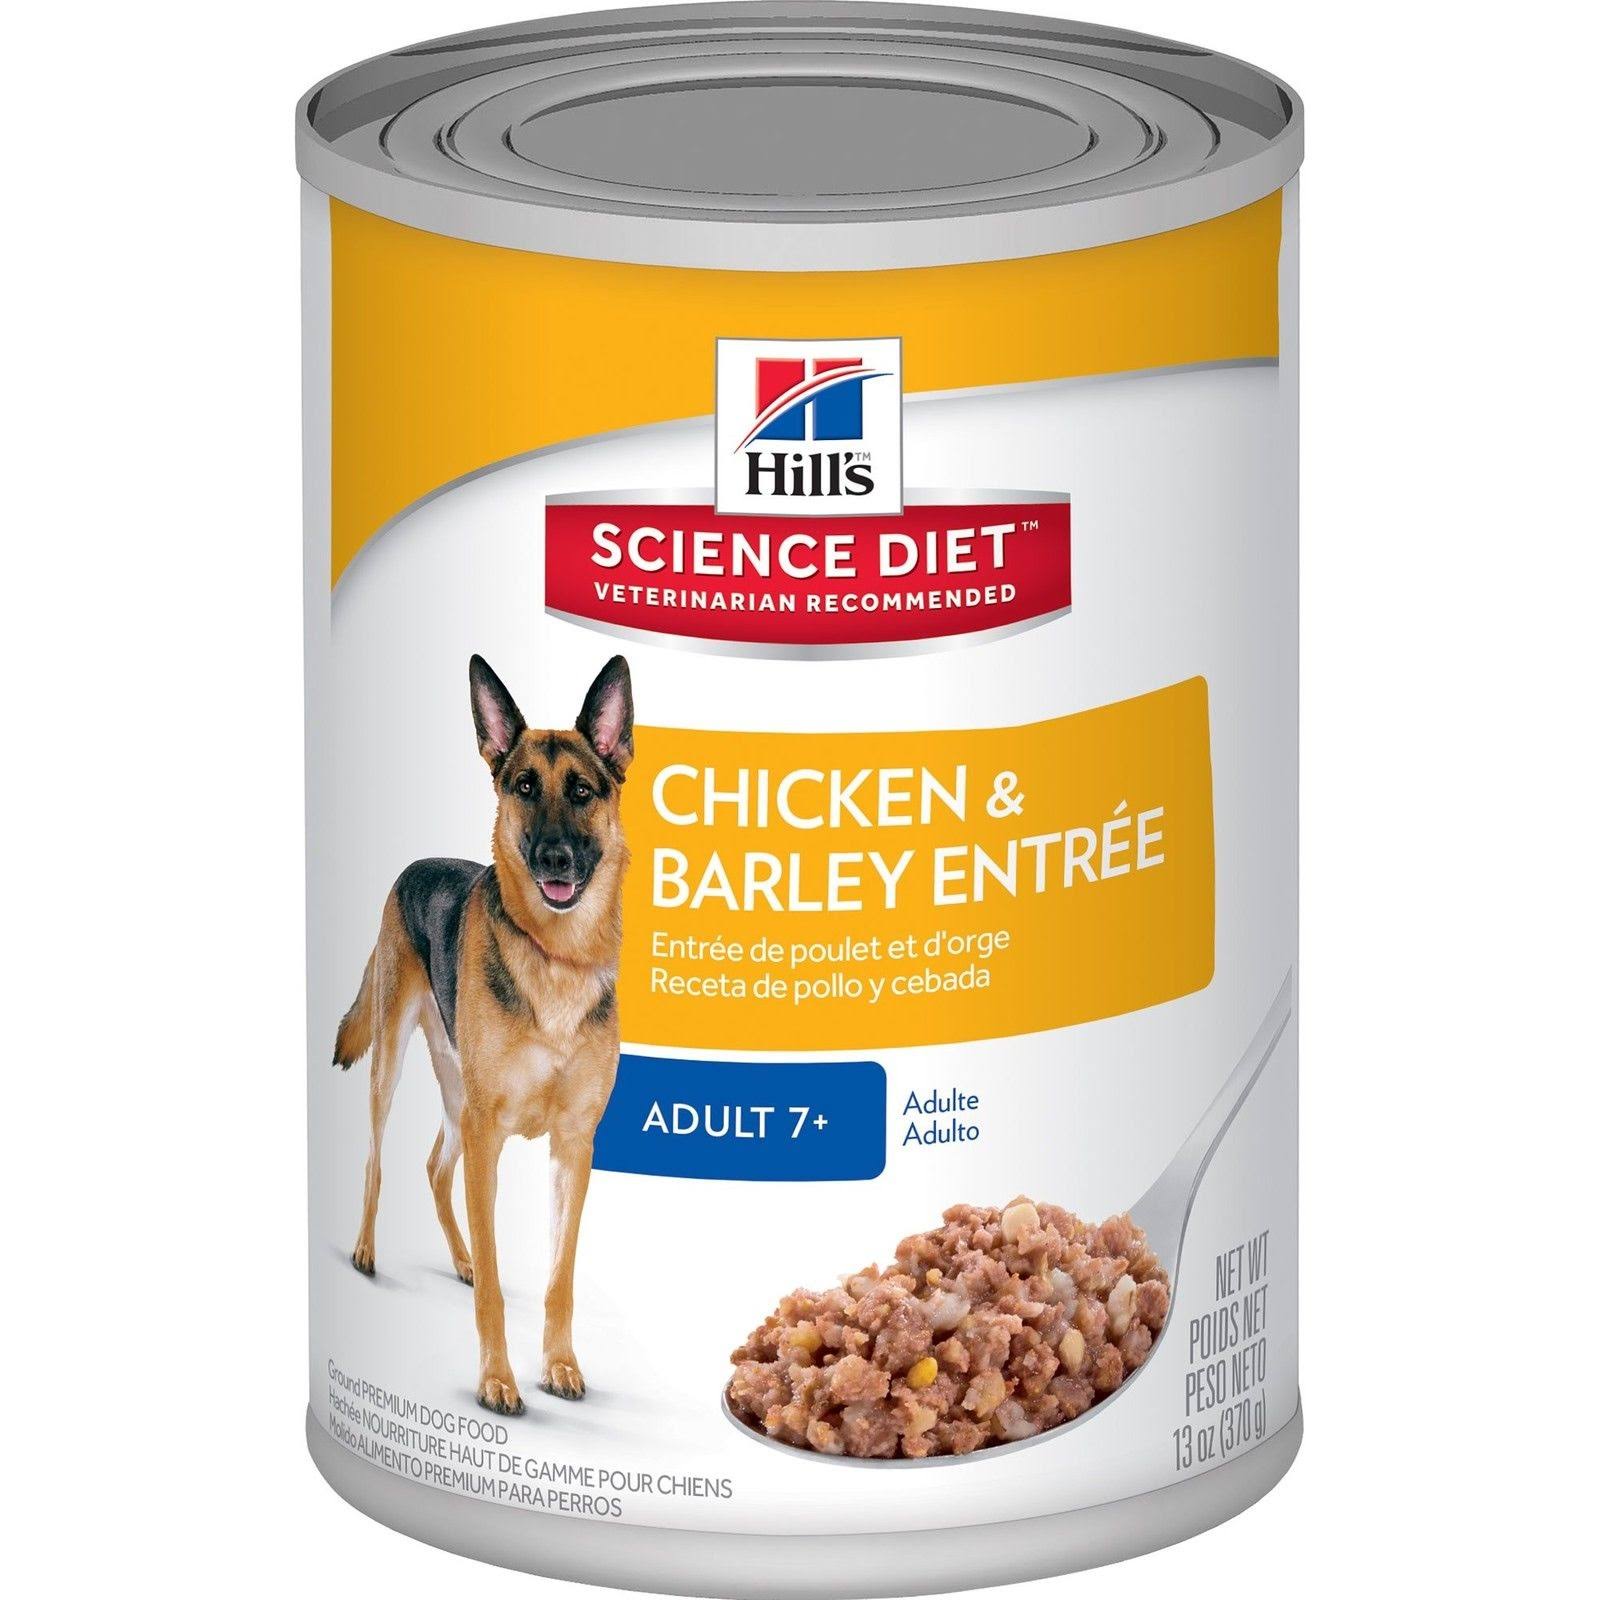 Hill's Science Diet Ground Premium Dog Food - Adult 7 Plus, Chicken and Barley Entrée, 13oz